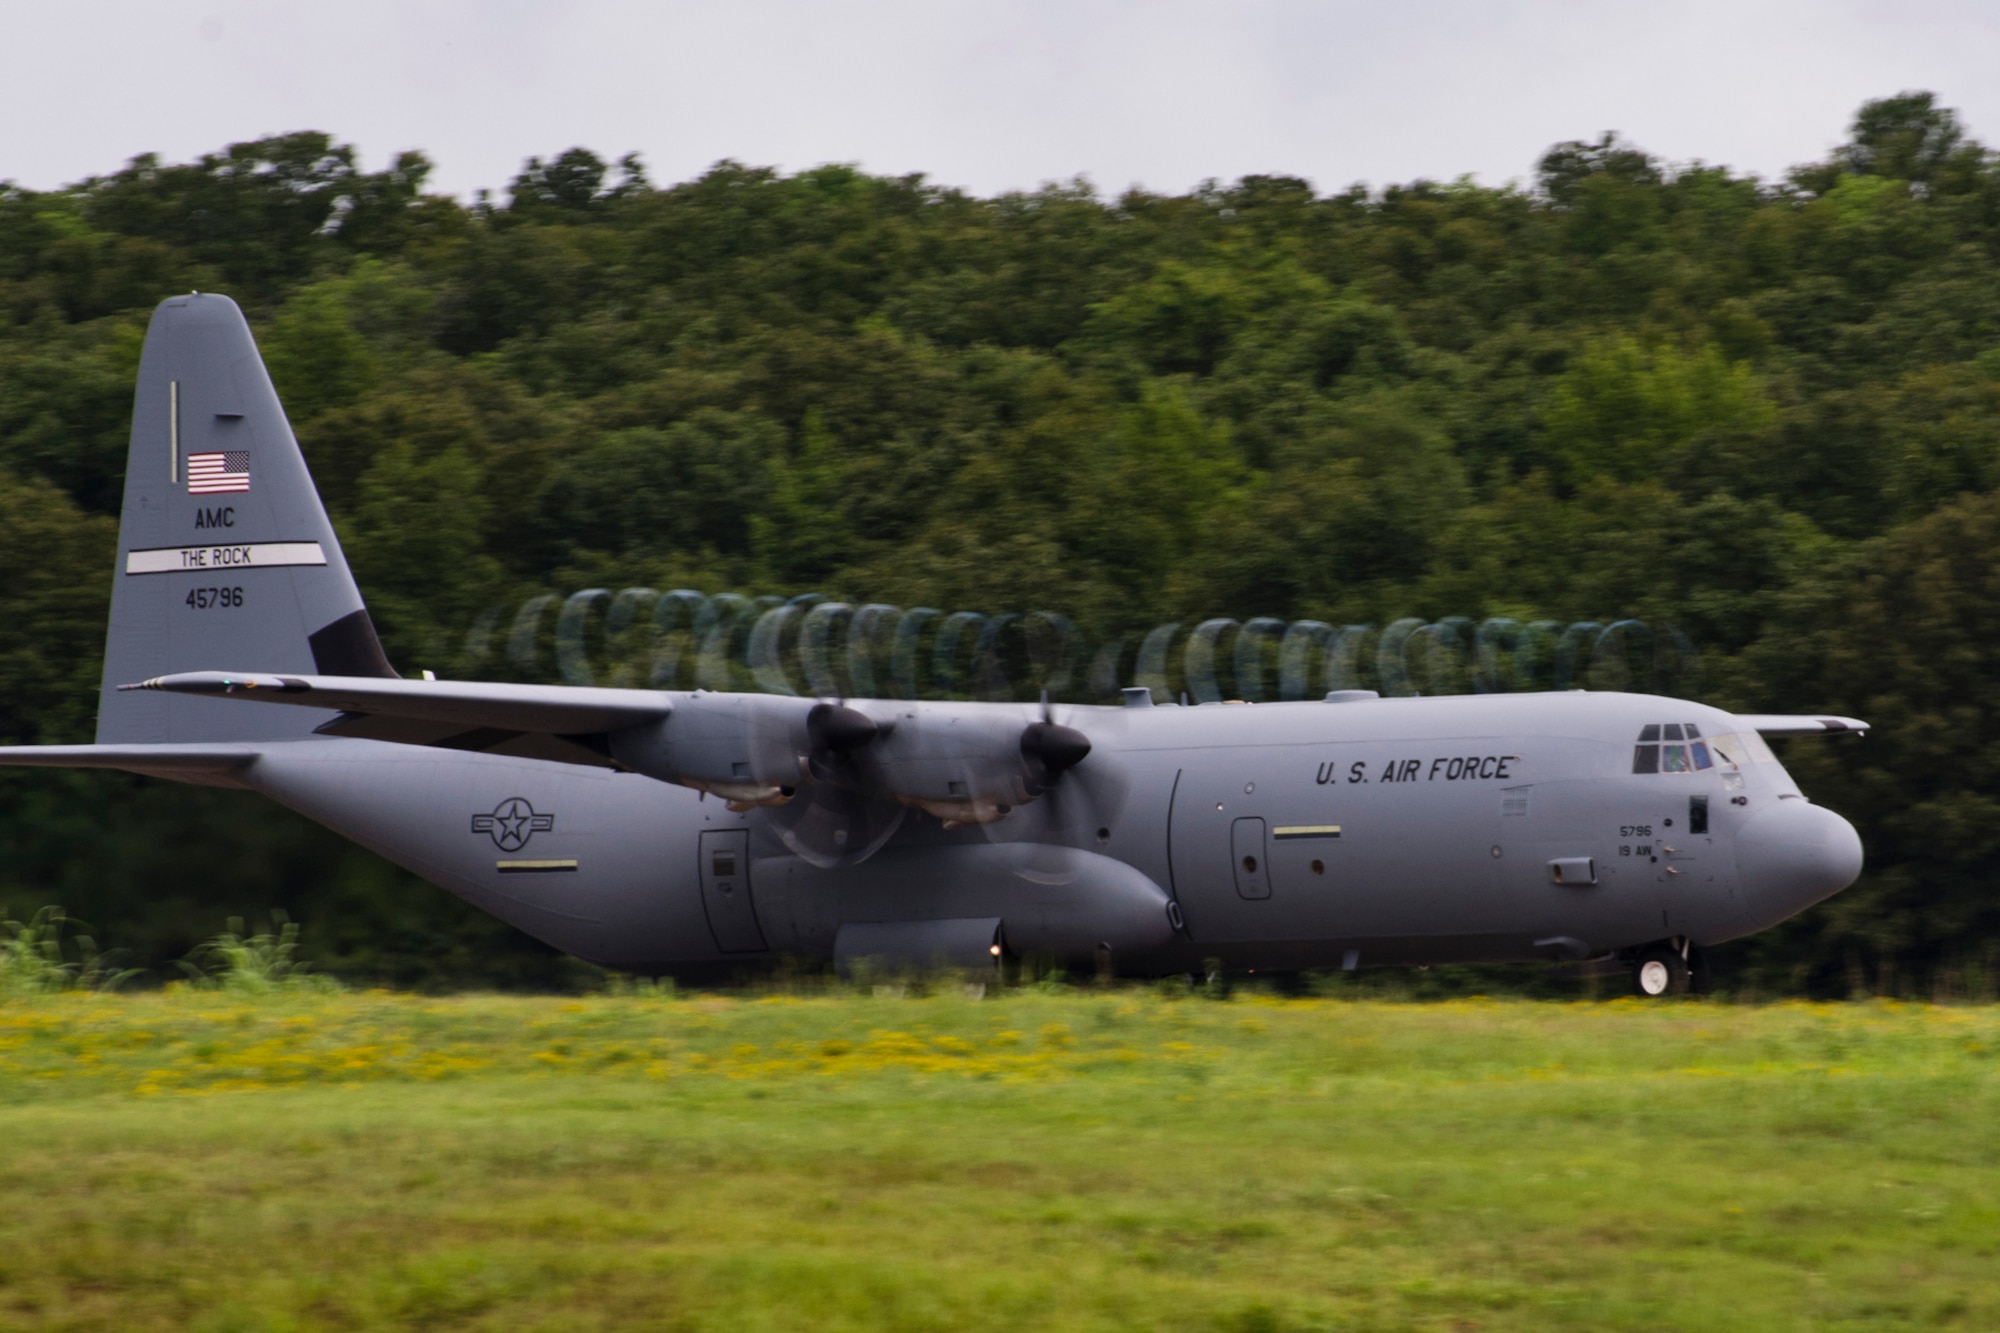 The presence of water on the runway creates a dynamic effect as a C-130J takes off from the runway at Little Rock Air Force Base, Ark., Aug. 13, 2016. The aircraft and aircrew were part of the first two-ship mission during a Unit Assembly Training weekend, since the 913th Airlift Group transitioned from the “H” to the “J” model. (U.S. Air Force photo by Master Sgt. Jeff Walston)